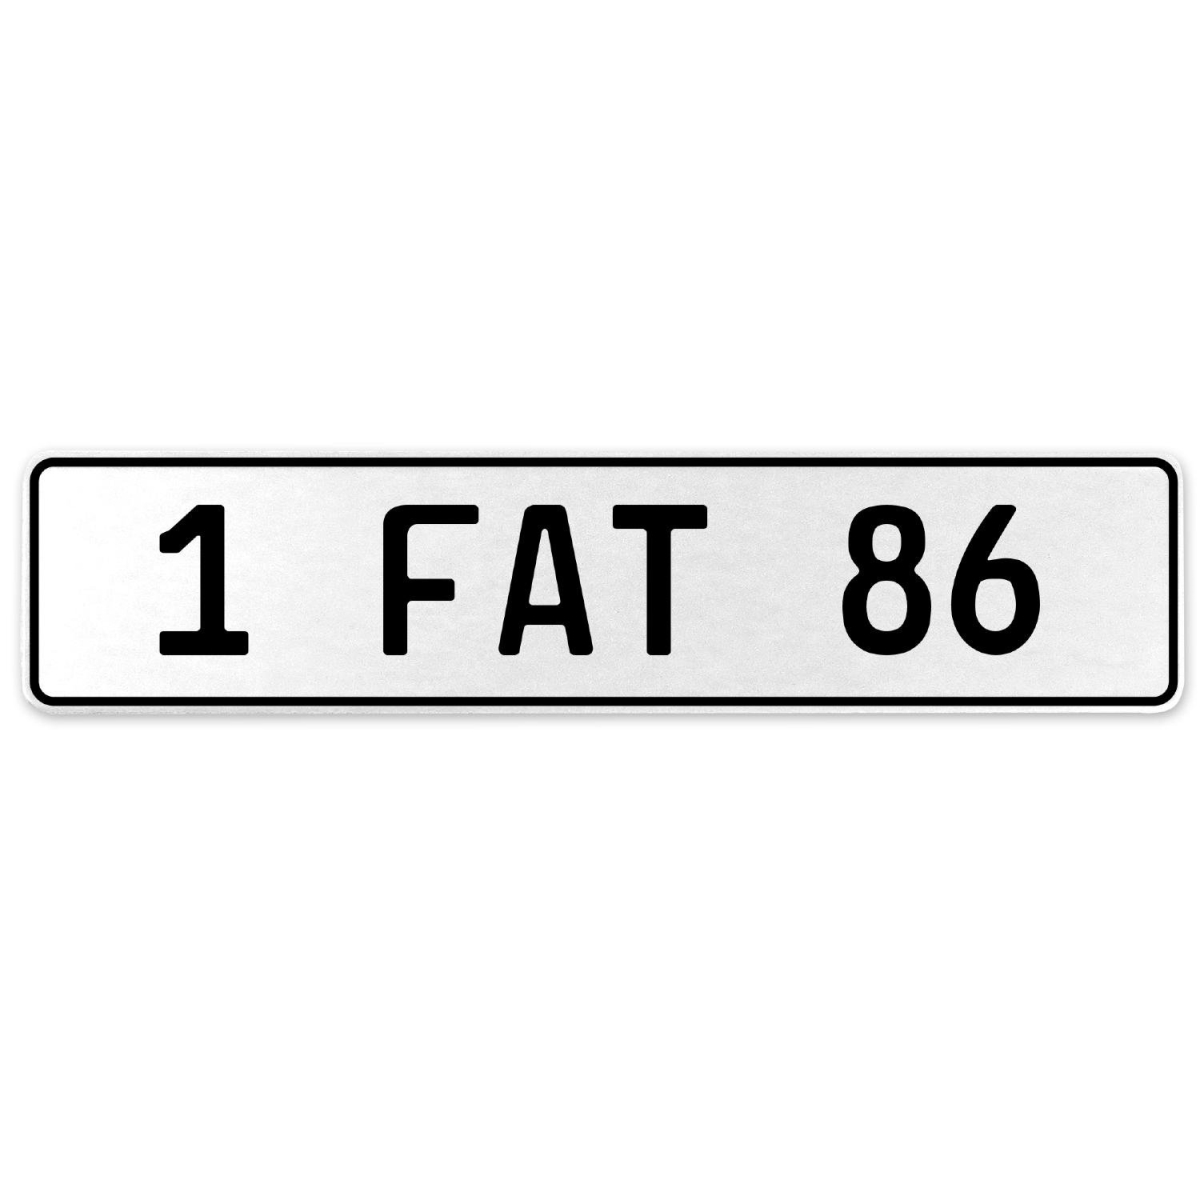 1 Fat 86 - White Aluminum Street Sign Mancave Euro Plate Name Door Sign Wall